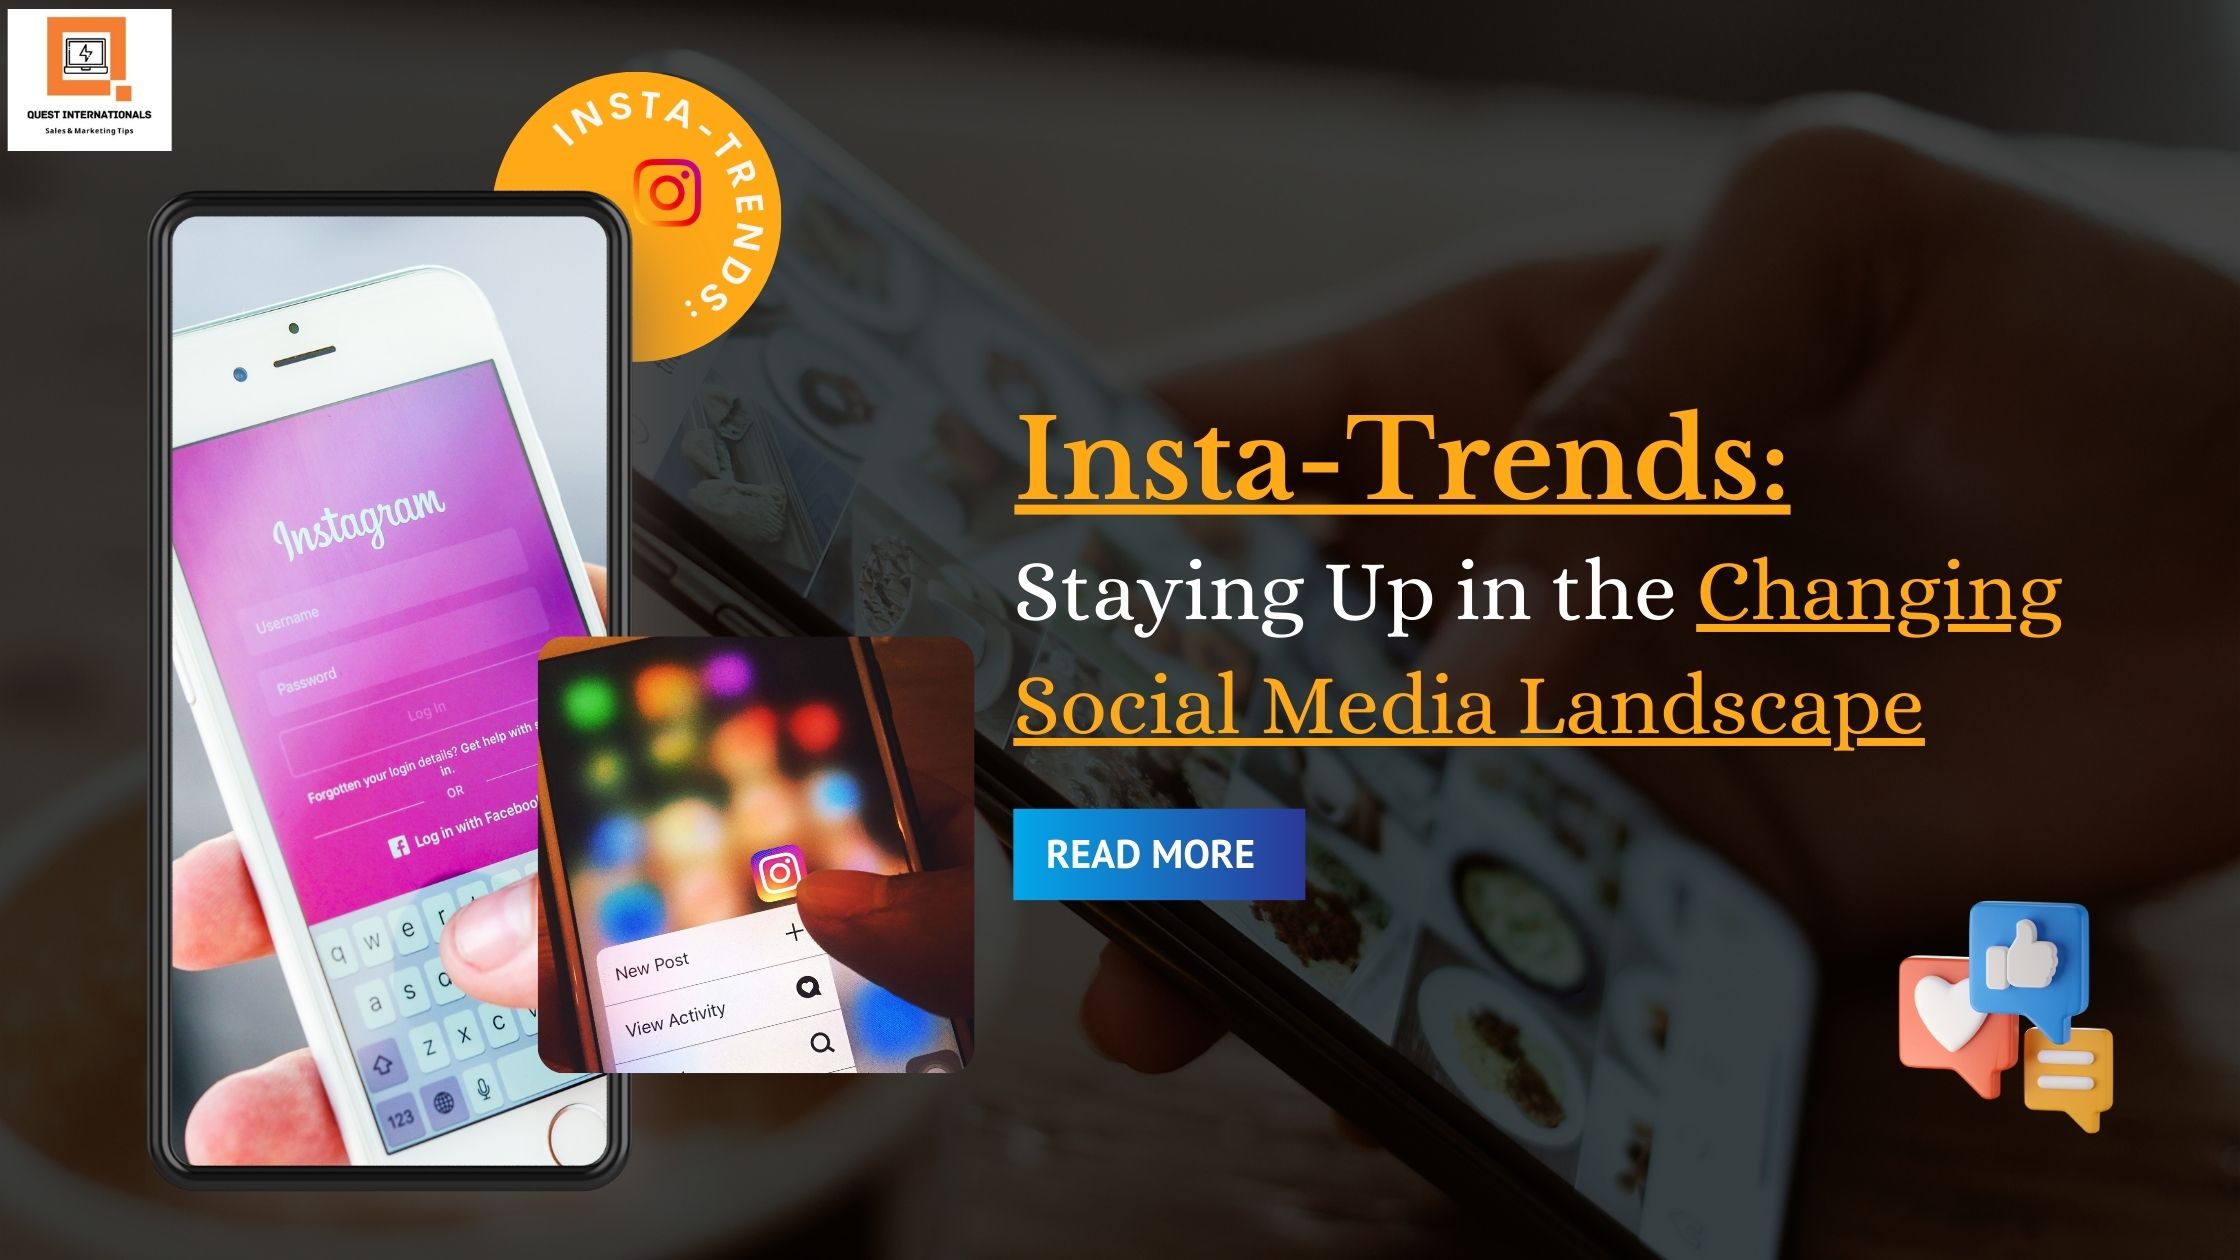 You are currently viewing Insta-Trends: Staying Up in the Changing Social Media Landscape